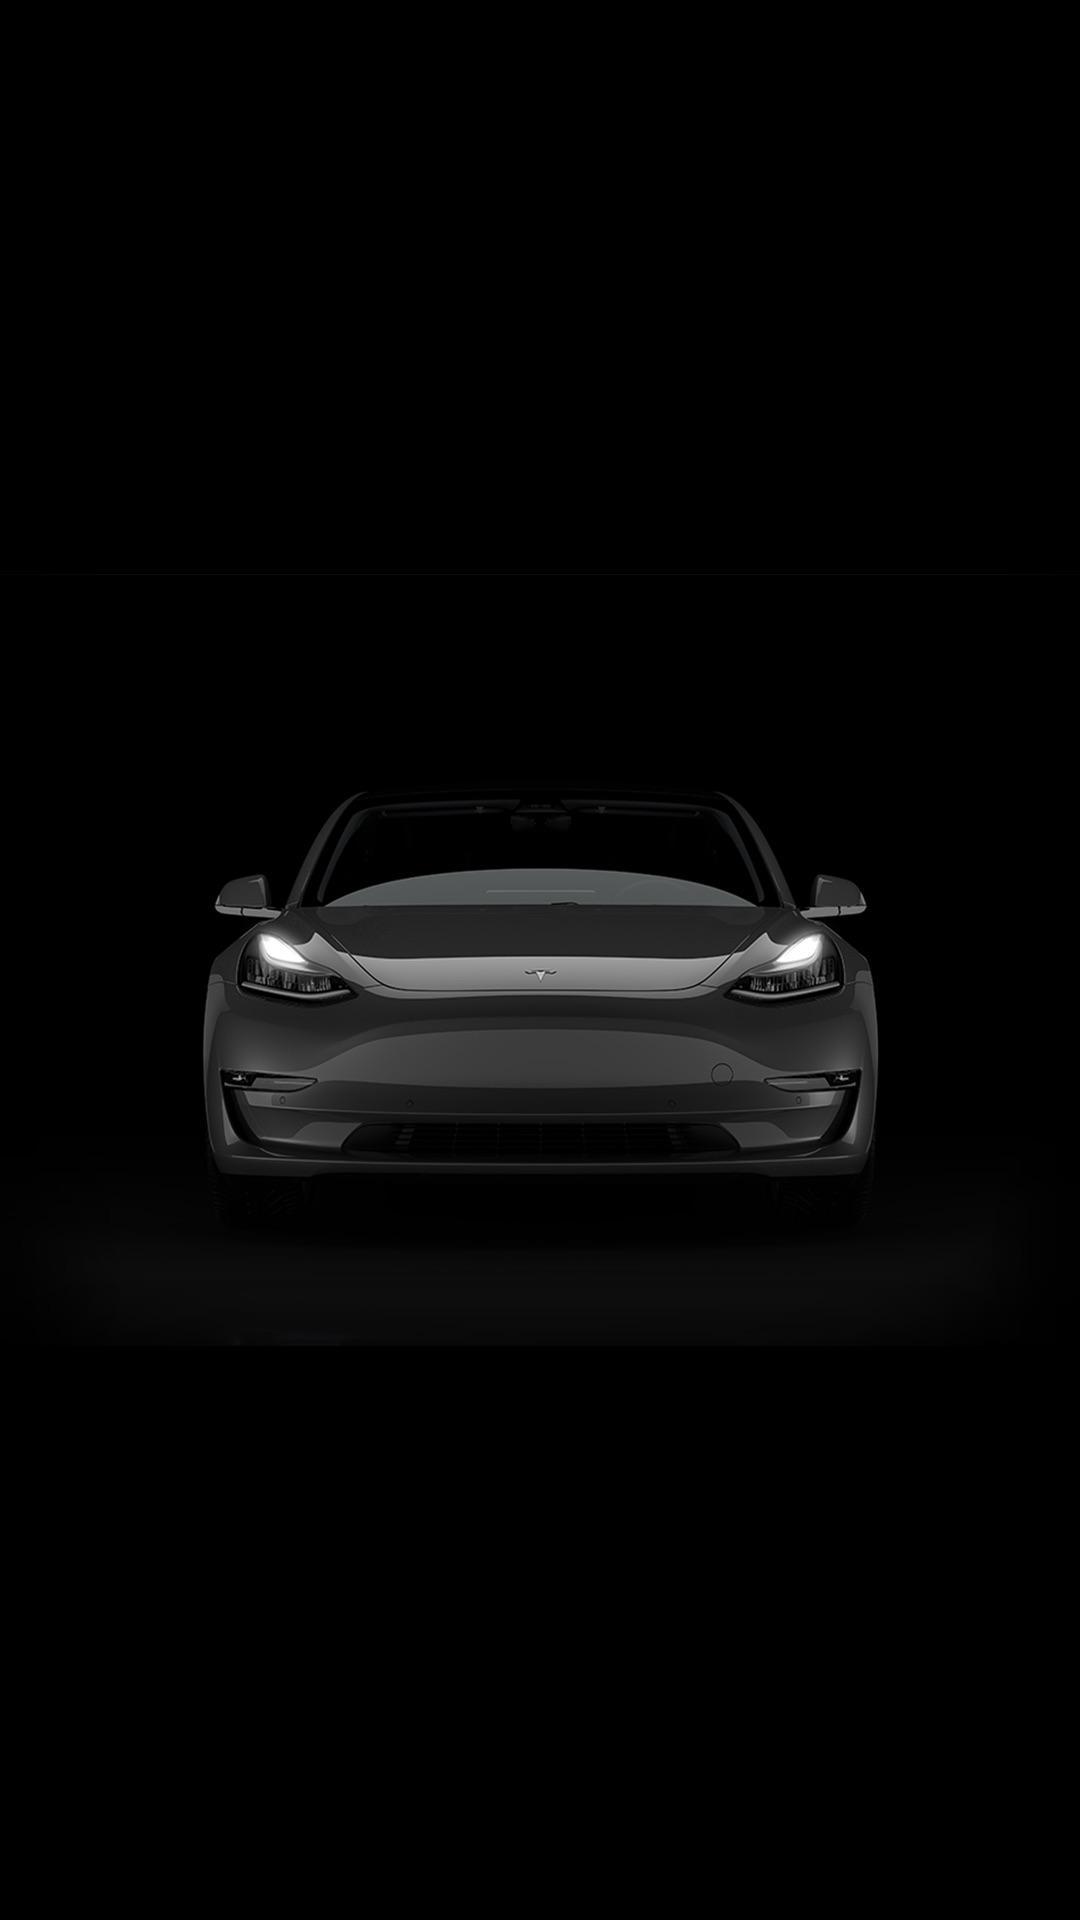 I'm made this mean looking Model 3 image into a wallpaper